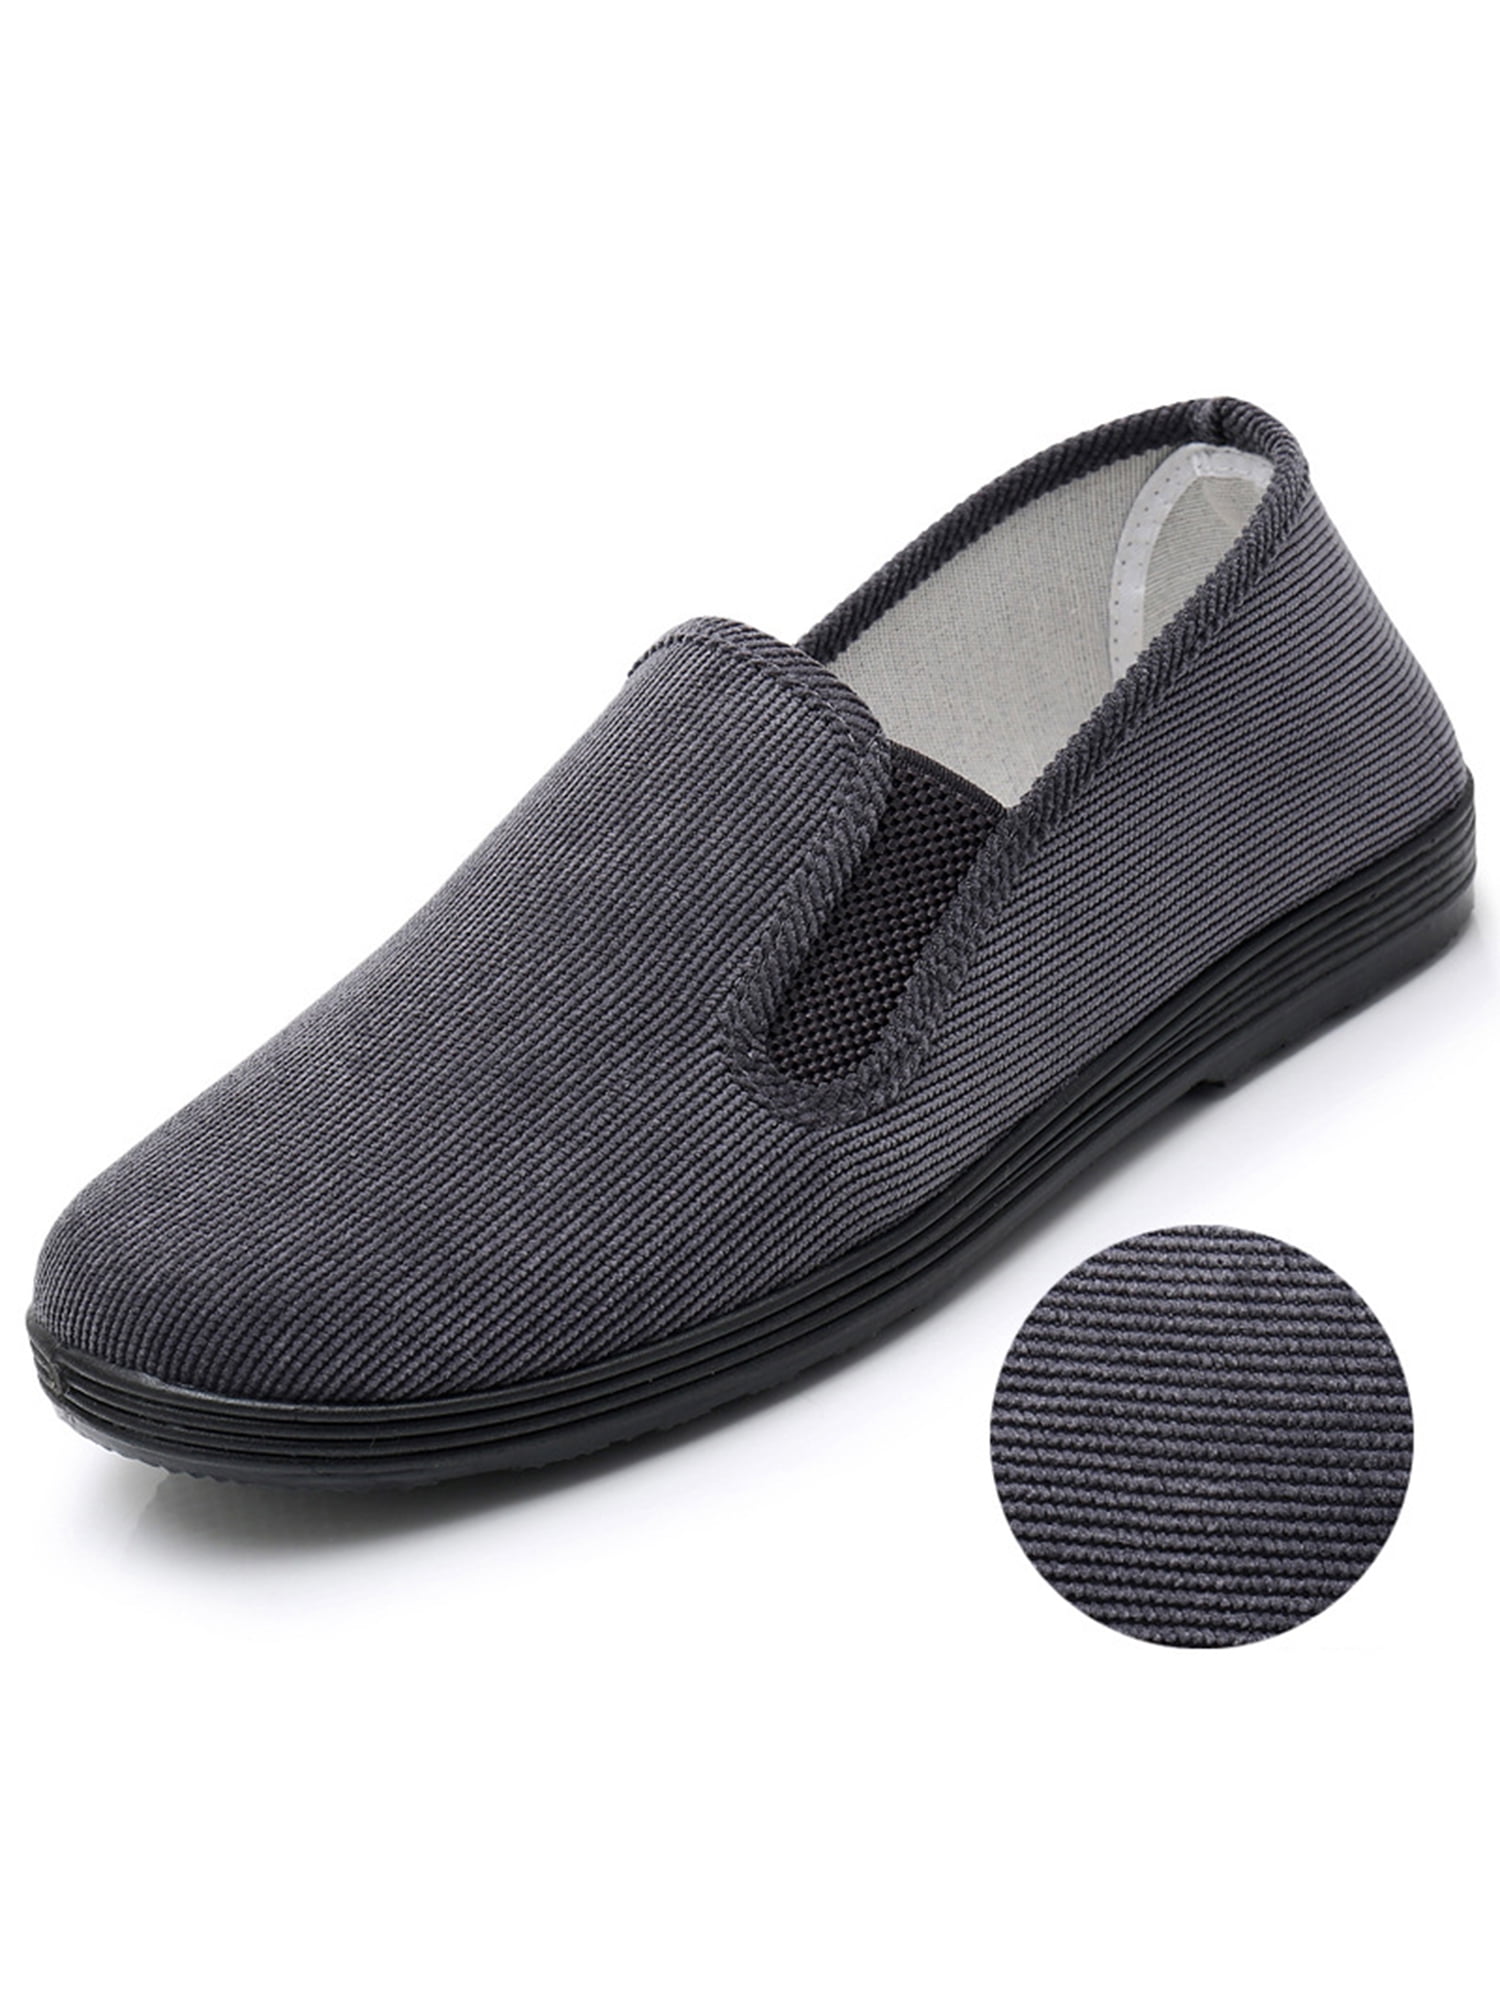 Vic Gray Men Soft Oxford Loafers Slip-on Male Breathable Casual Flats Shoes 